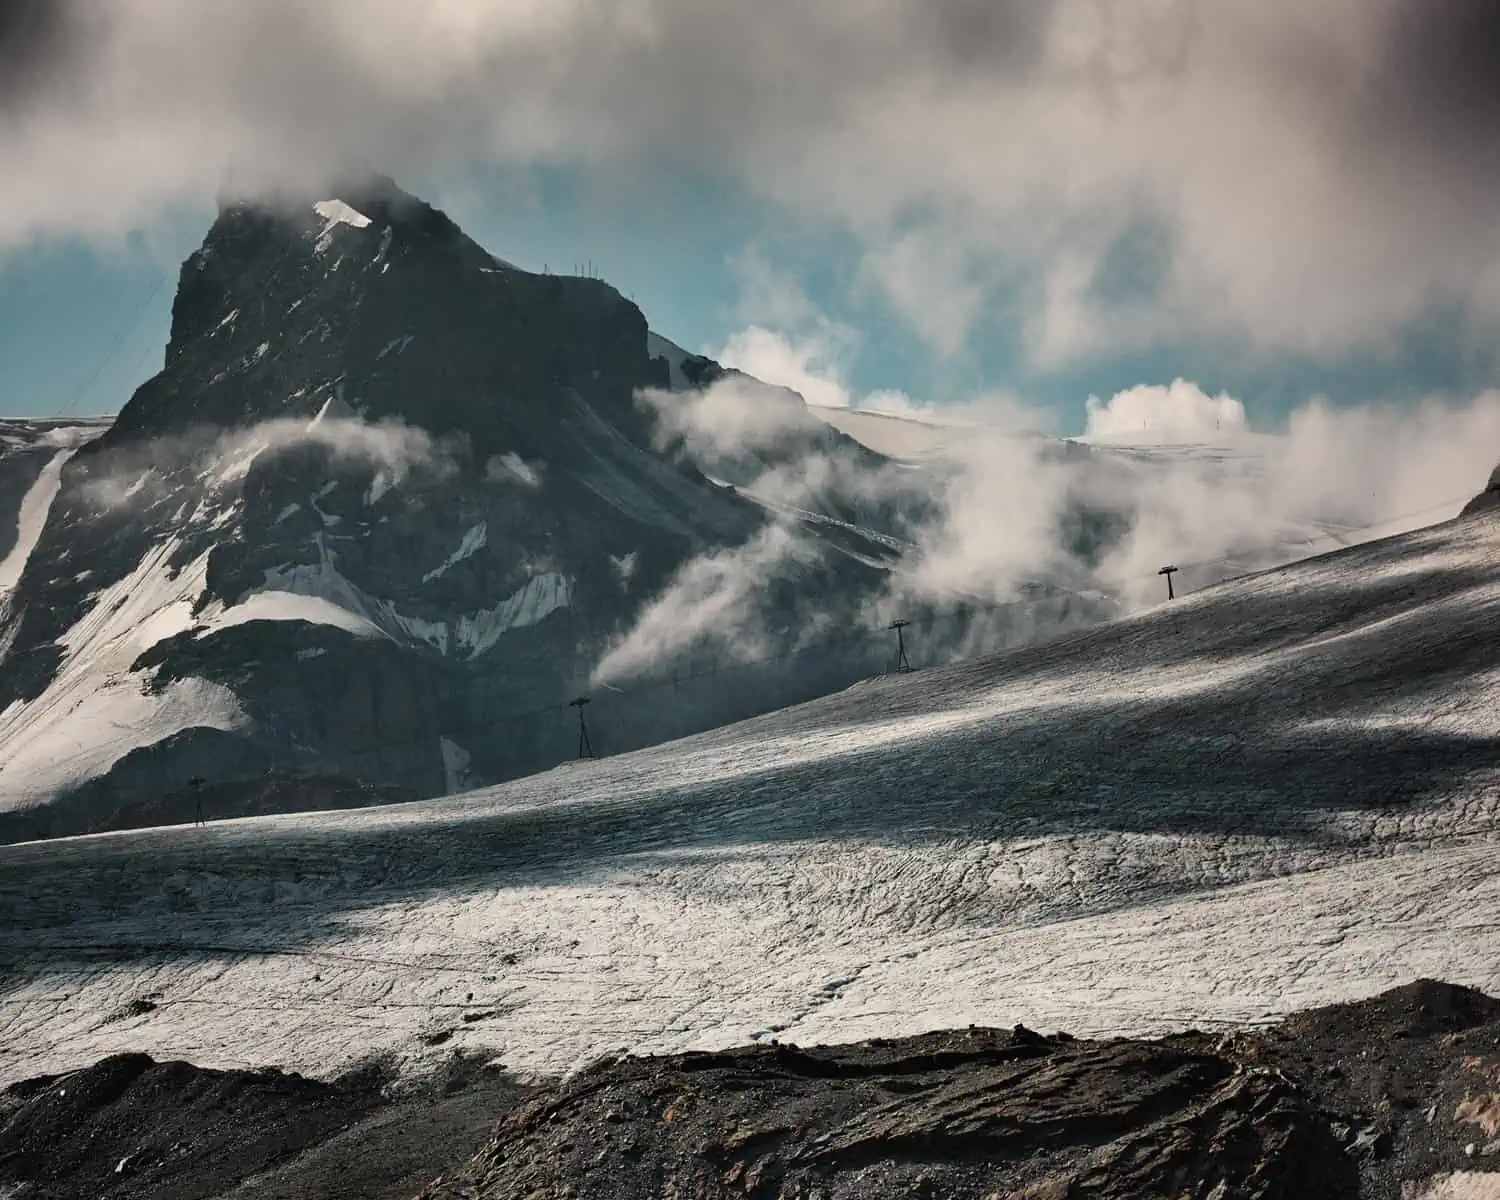 Image Description: A landscape format image. The image is dominated by the ice field of a glacier. We see shadows cast by low clouds which are also visible in the image whilst a high mountain peak towers in the background. A ski lift runs diagonally through the frame. A band of dark rock dominates the foreground. The colours are cold and neutral.